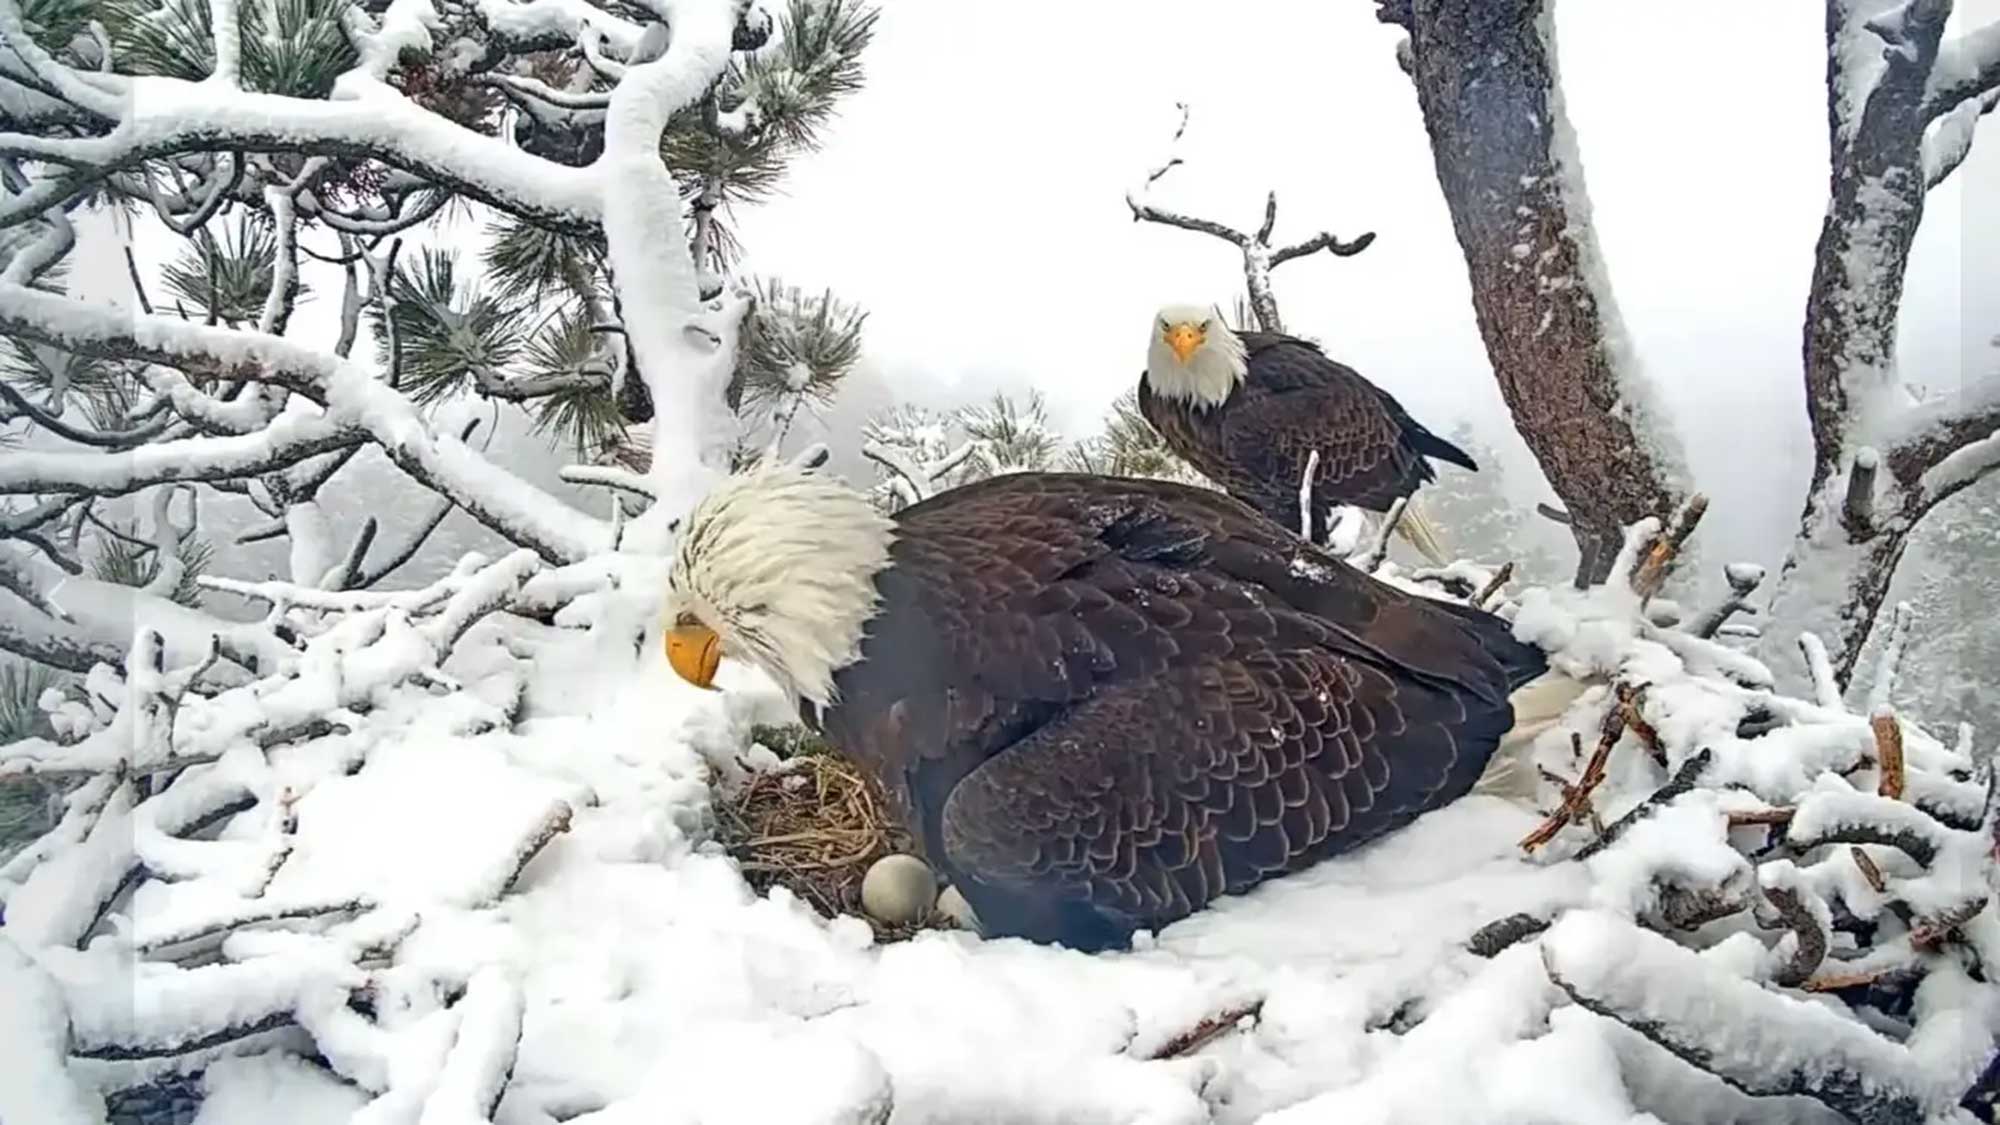 Sadly, these live-streamed bald eagle eggs likely won’t hatch